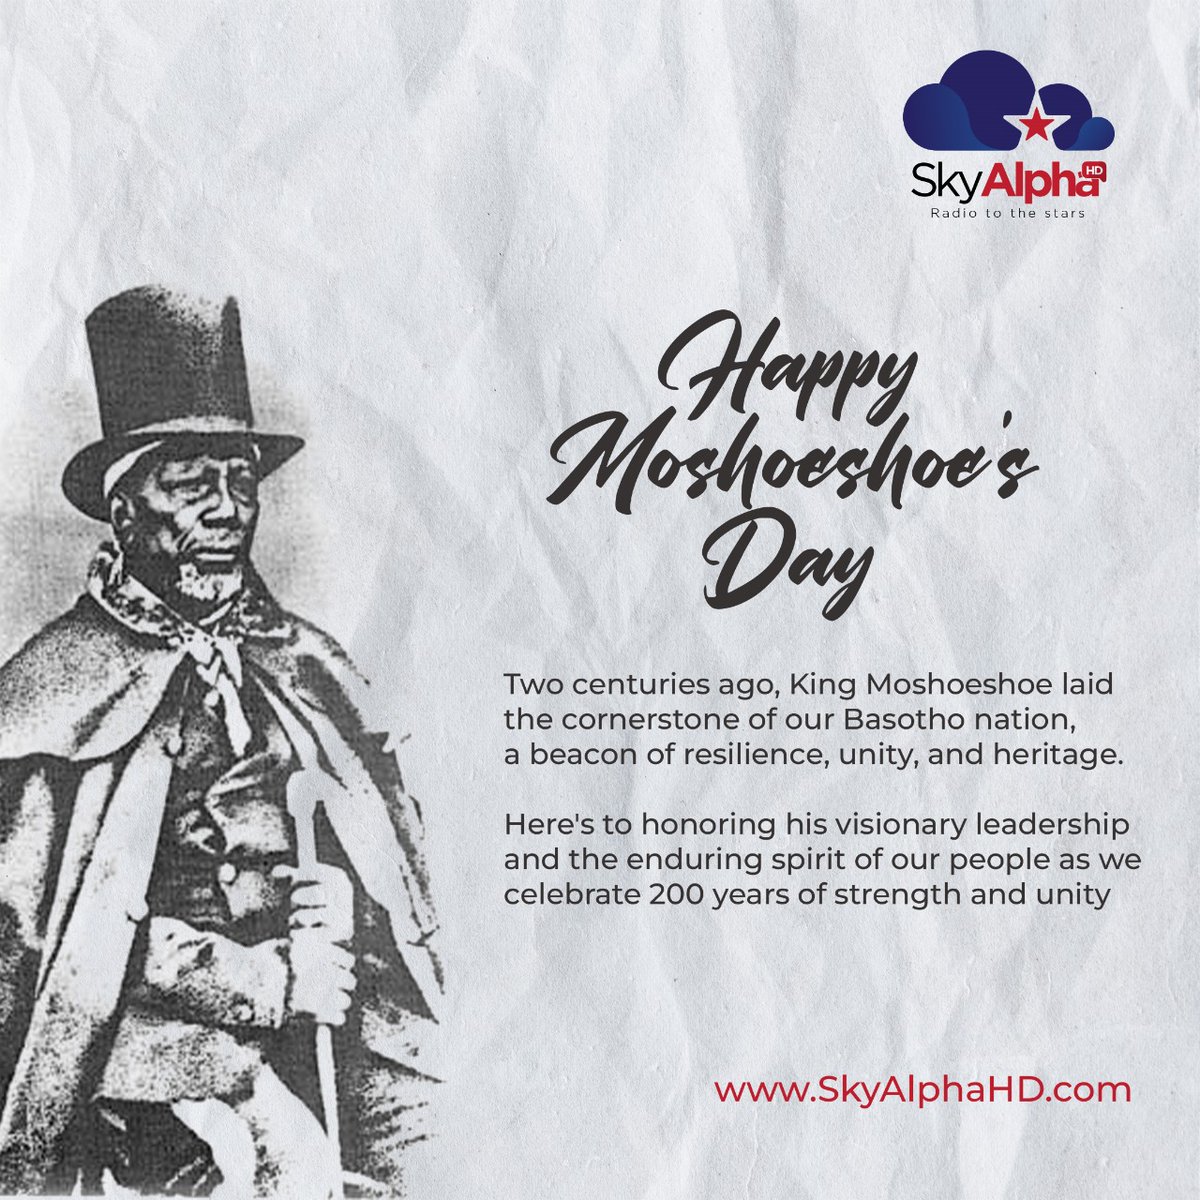 Happy Moshoeshoe's Day to all our loyal listeners, advertisers and supporters. 

#Lesotho200
#MoshoeshoeDay
#SkyAlphaHD